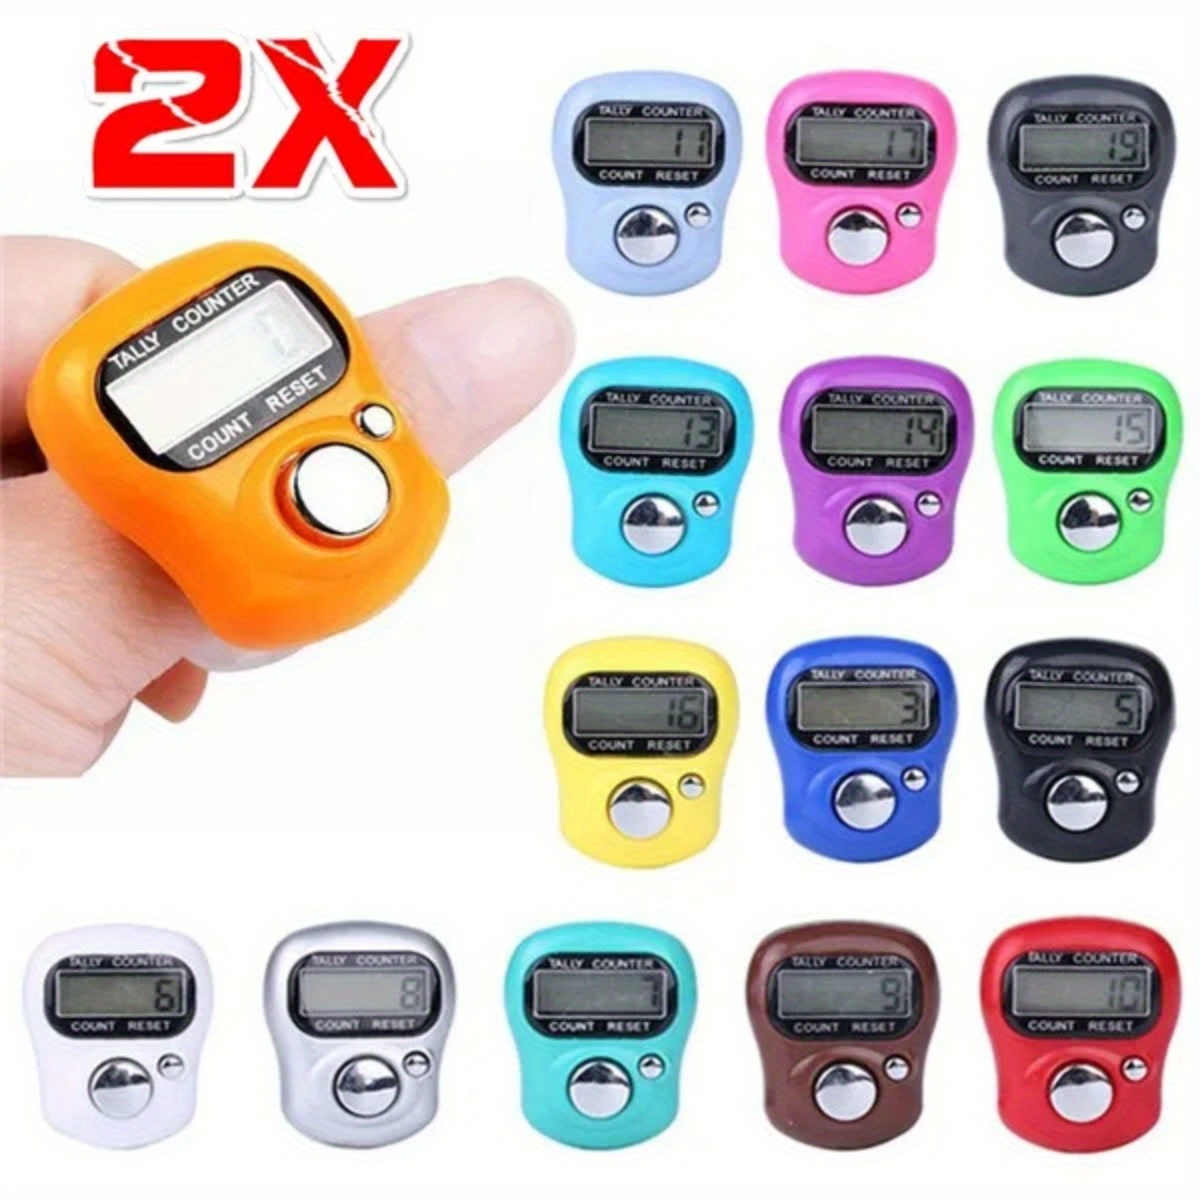 Digital Handheld Clicker Metal Case Mechanical Digits Counter With Manual  Counter With Finger Ring For School Golf Knitting(4pcs)